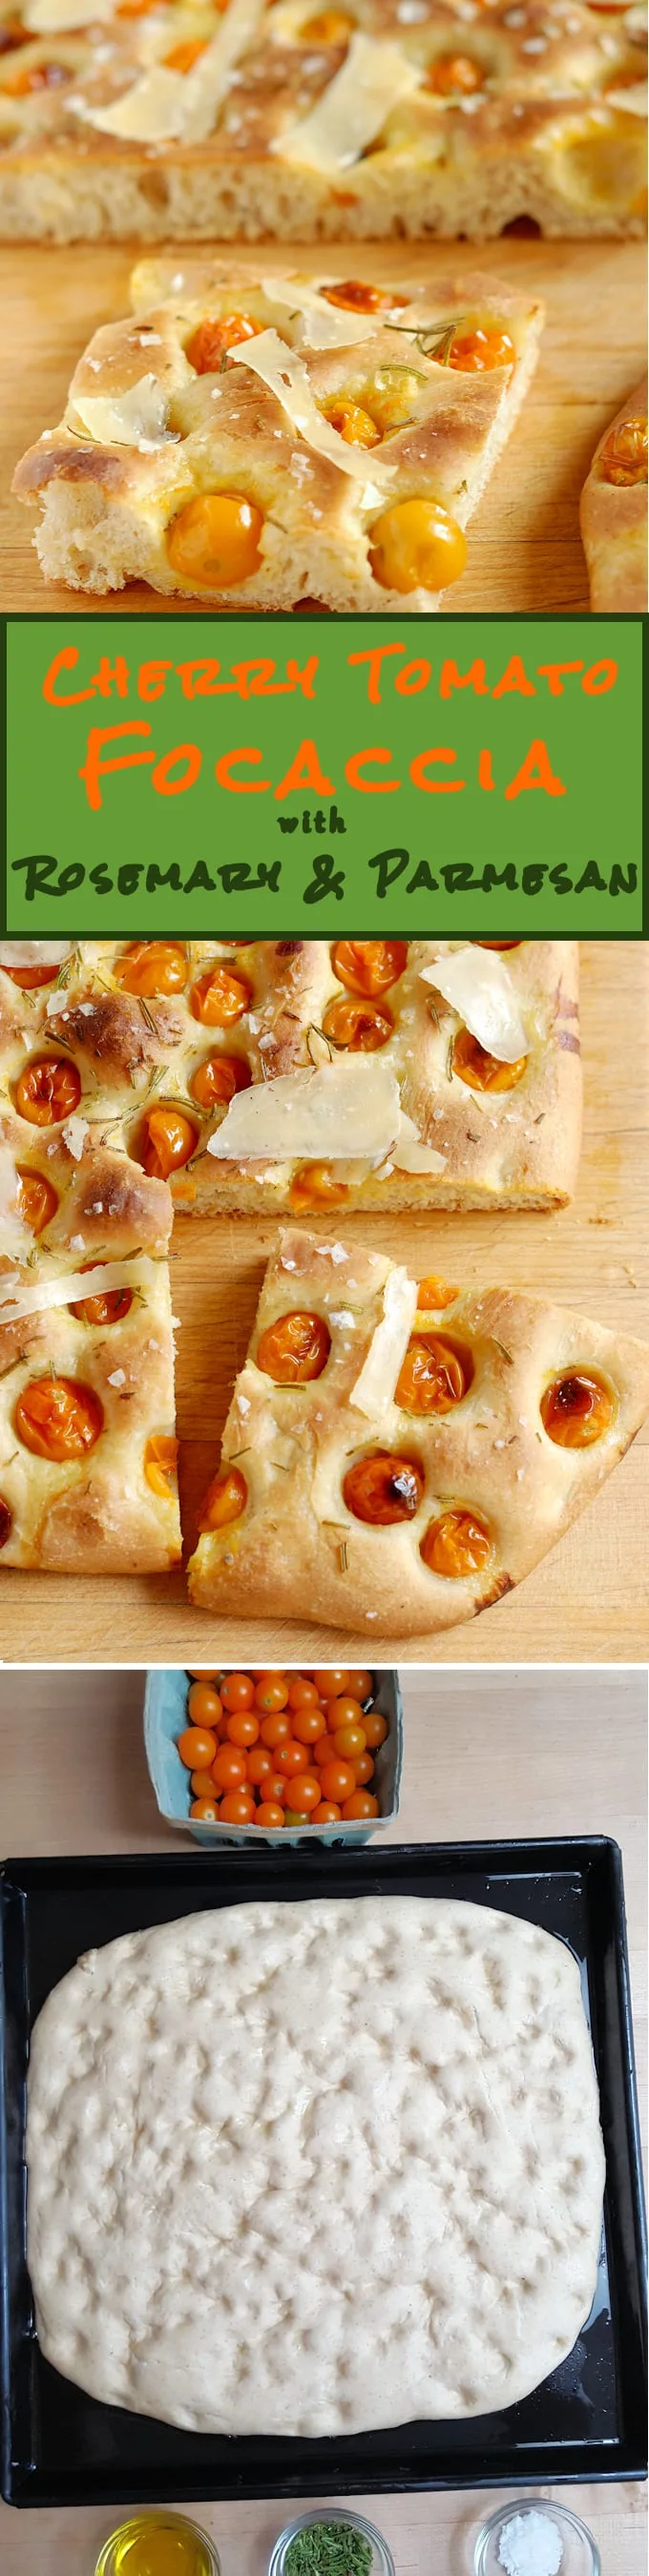 Bursts of sweet cherry tomato with fragrant rosemary on a light and chewy crust - Cherry Tomato Focaccia with Rosemary & Parmesan is a great snack, or have it for lunch, or serve it with salad for a light dinner.